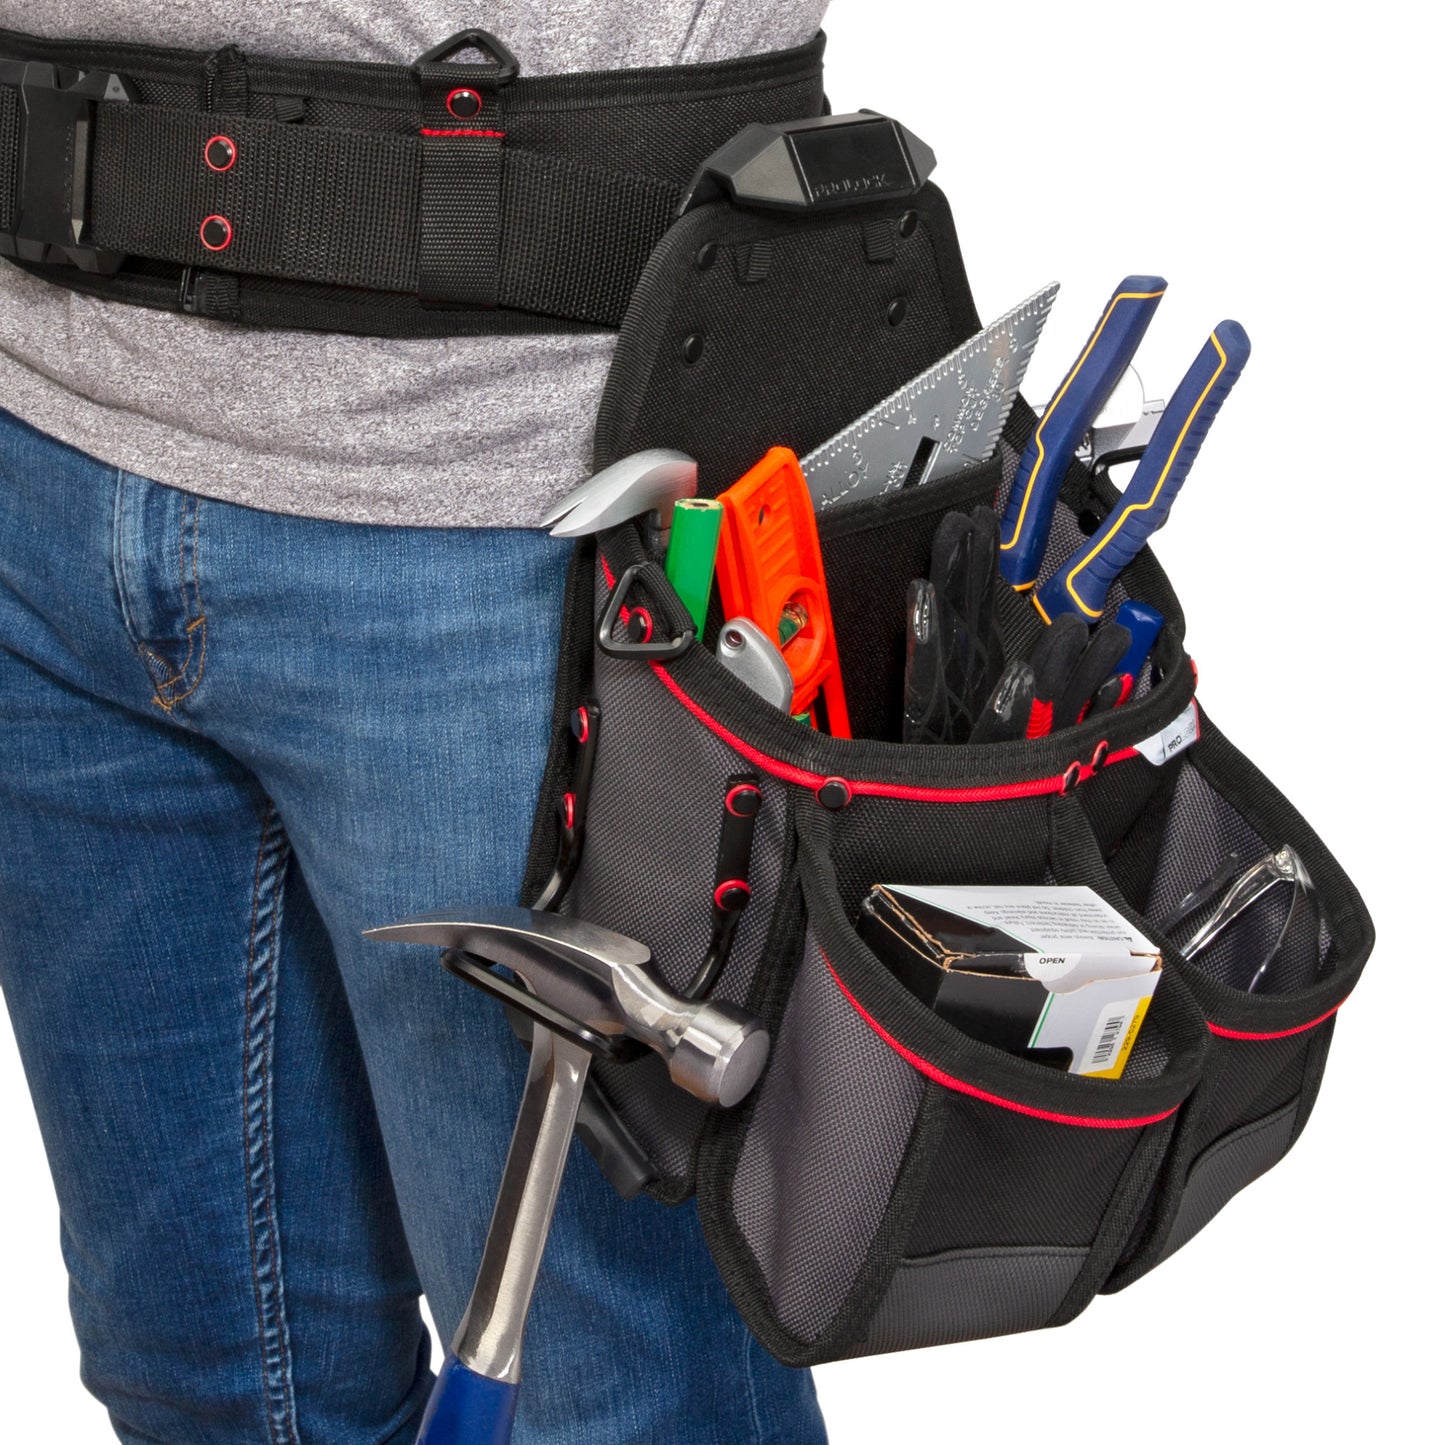 4-Piece Tool Belt and Pouch Contractor Set